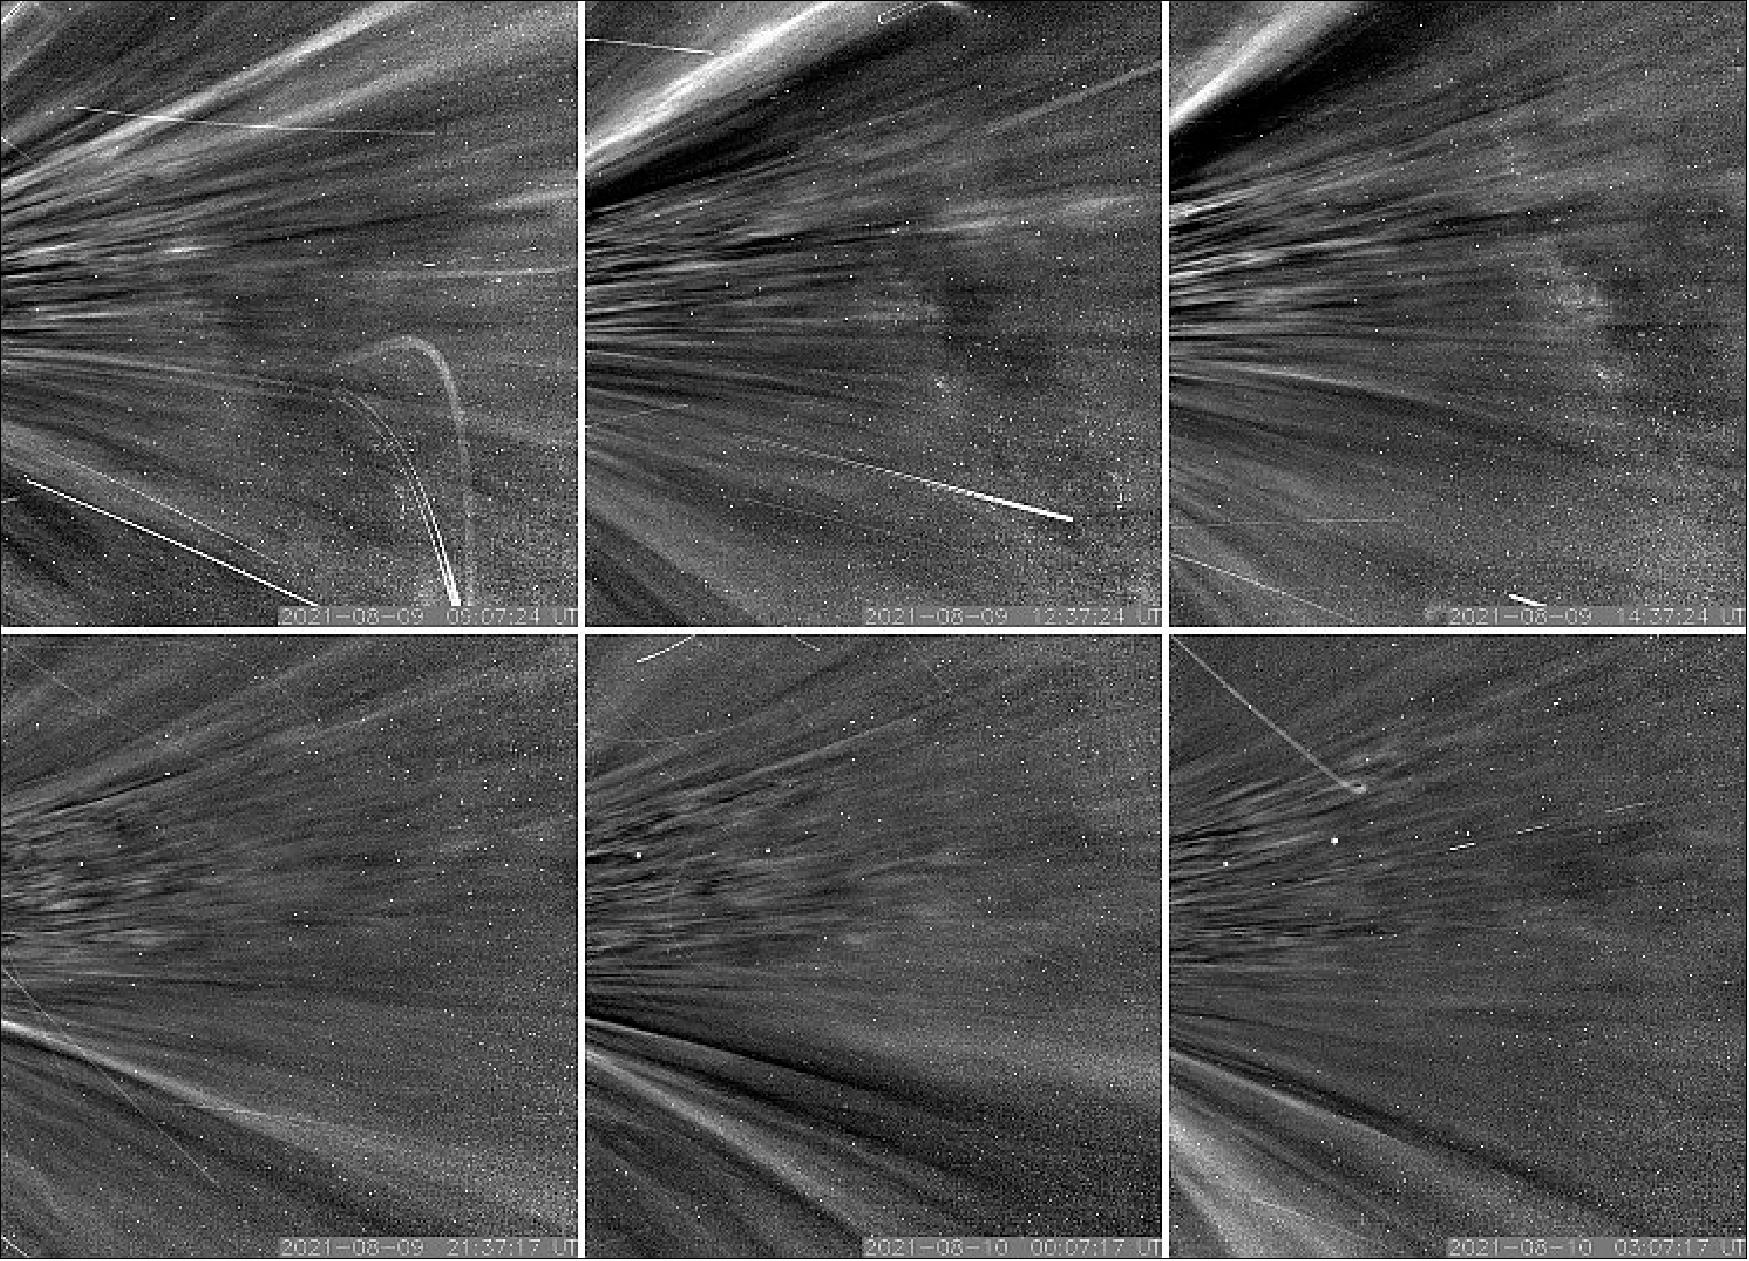 Figure 29: As Parker Solar Probe passed through the corona on encounter nine, the spacecraft flew by structures called coronal streamers. These structures can be seen as bright features moving upward in the upper images and angled downward in the lower row. Such a view is only possible because the spacecraft flew above and below the streamers inside the corona. Until now, streamers have only been seen from afar. They are visible from Earth during total solar eclipses.(image credits: NASA/Johns Hopkins APL/Naval Research Laboratory)